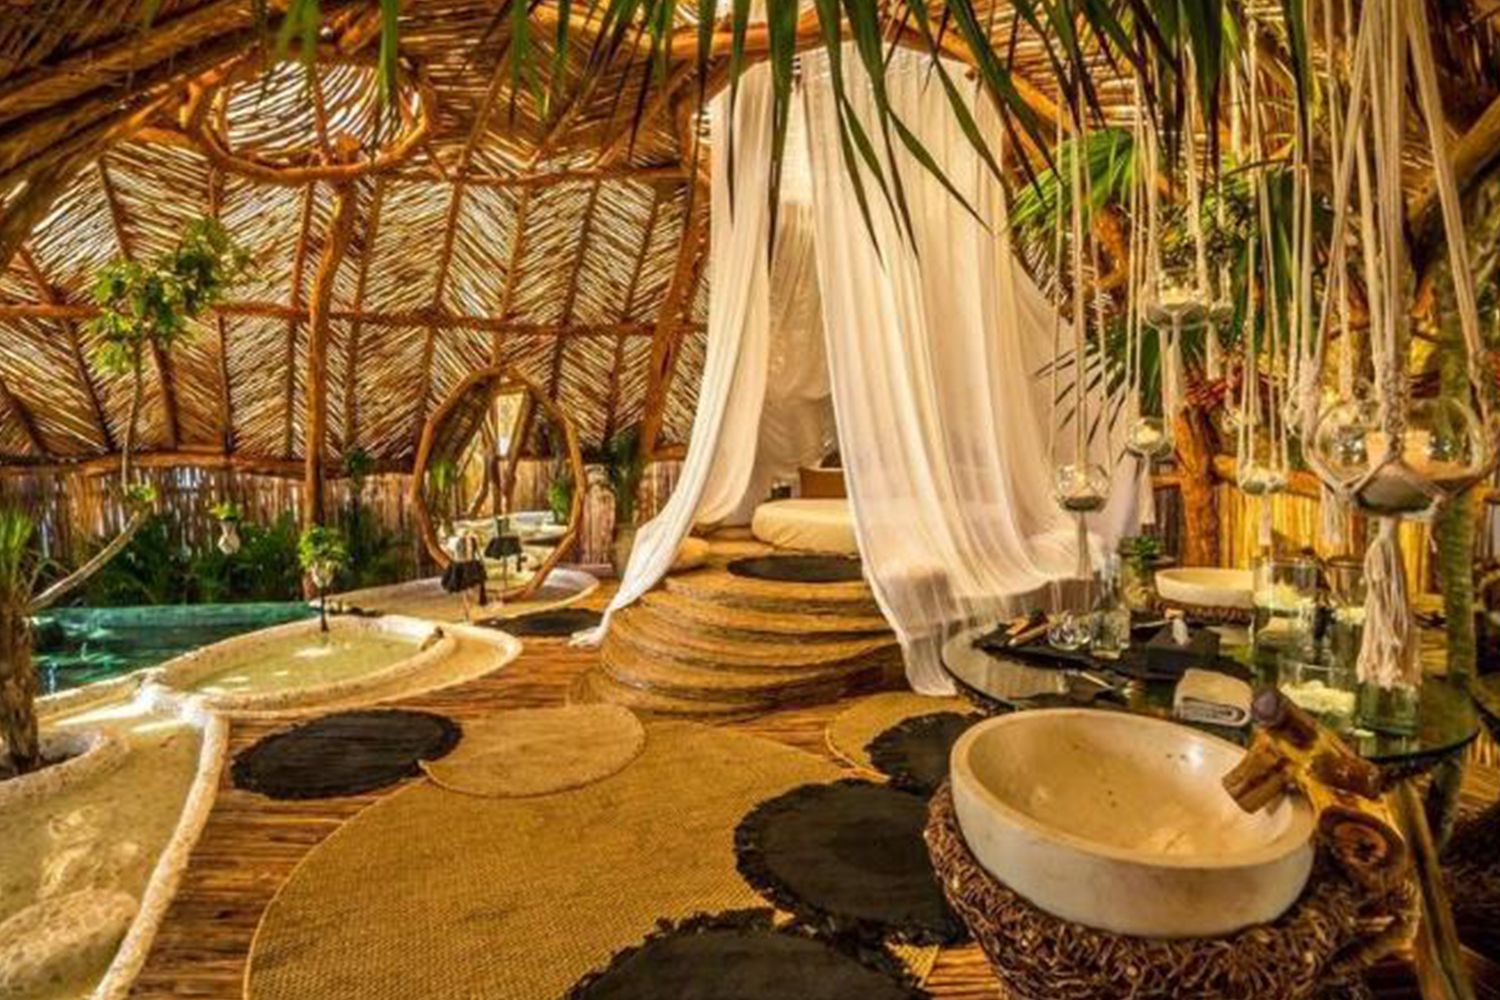 9 Most Unique Hotels in the World - Most Outrageous and Unusual